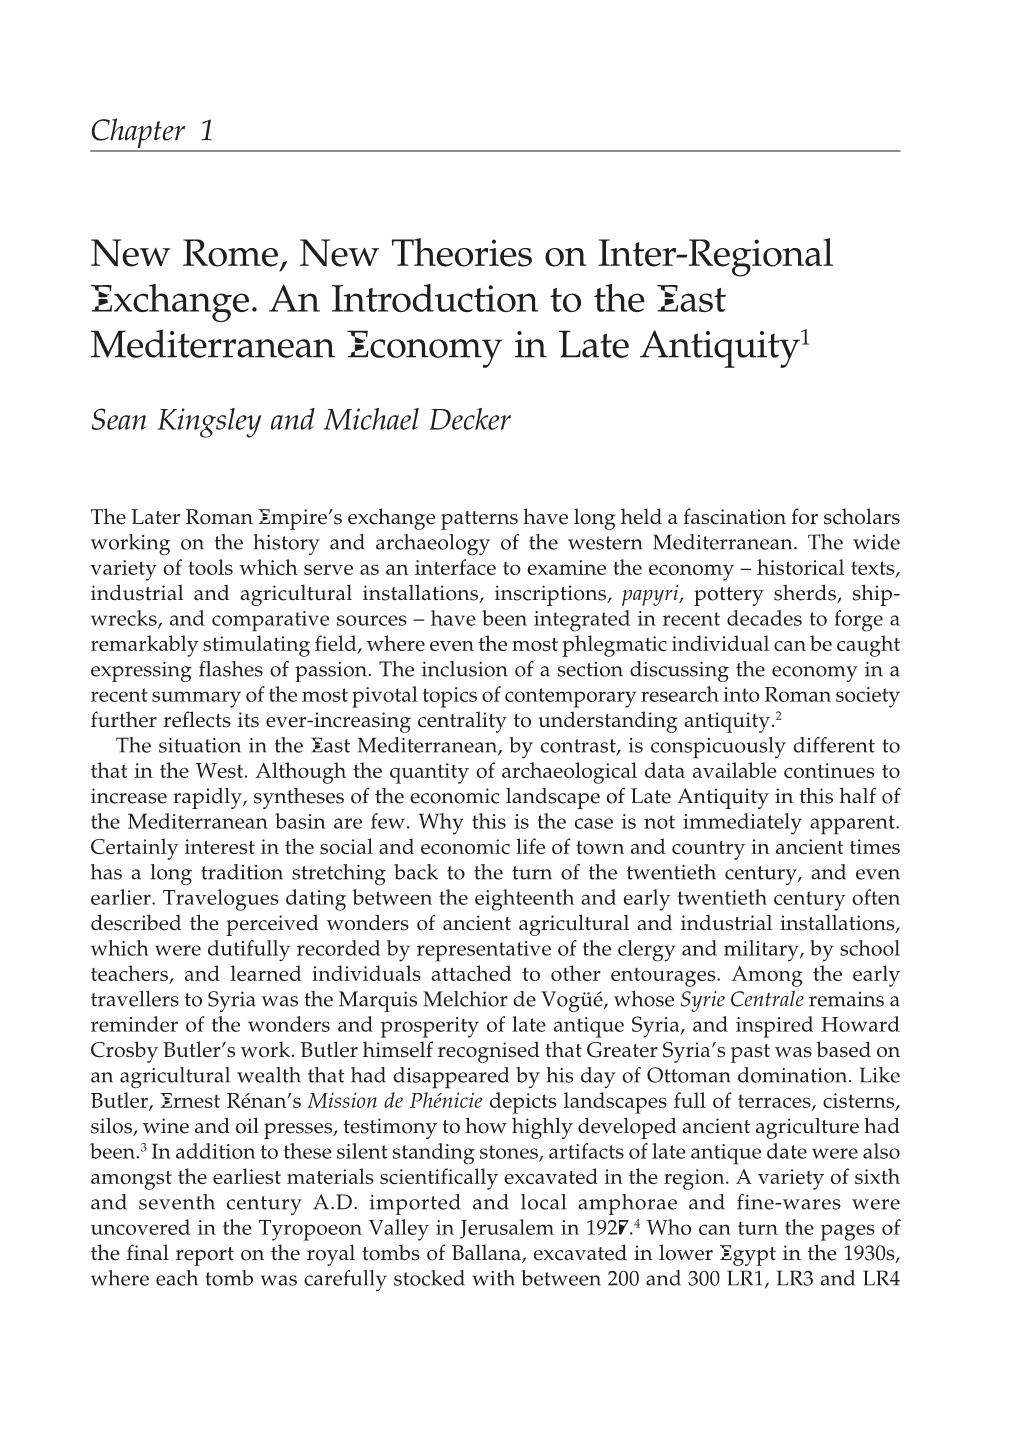 New Rome, New Theories on Inter-Regional Exchange. an Introduction to the East Mediterranean Economy in Late Antiquity1